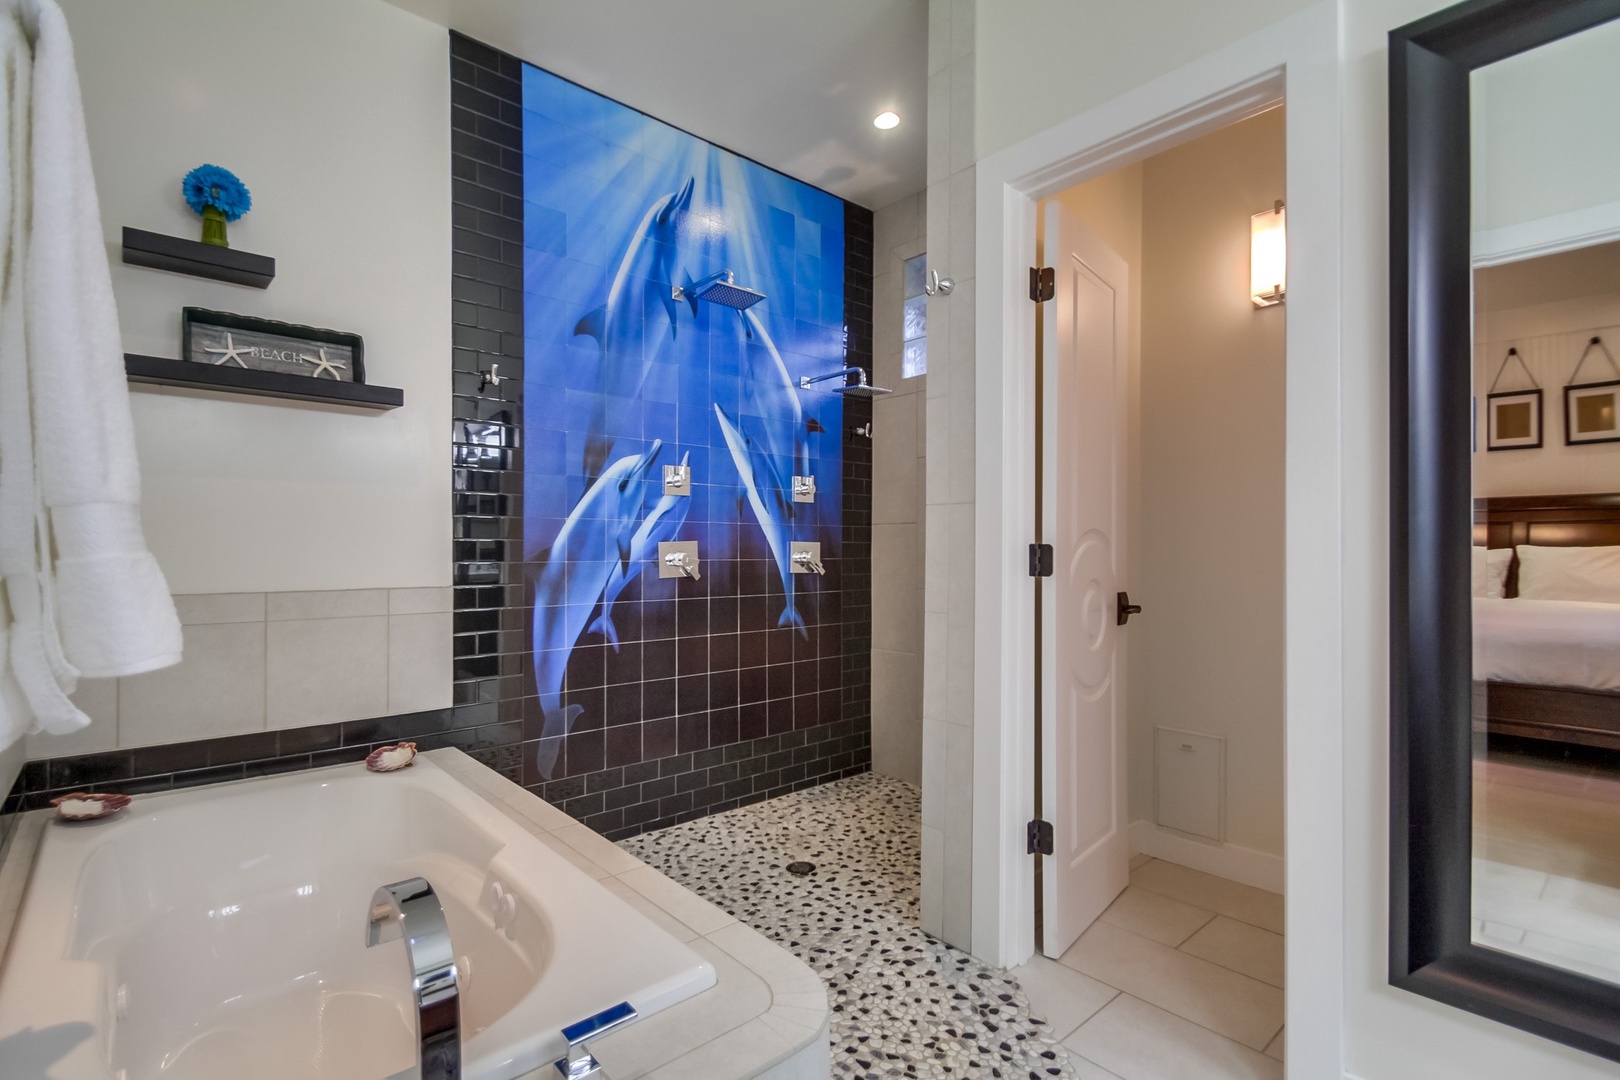 Primary bathroom with open air walk-in shower